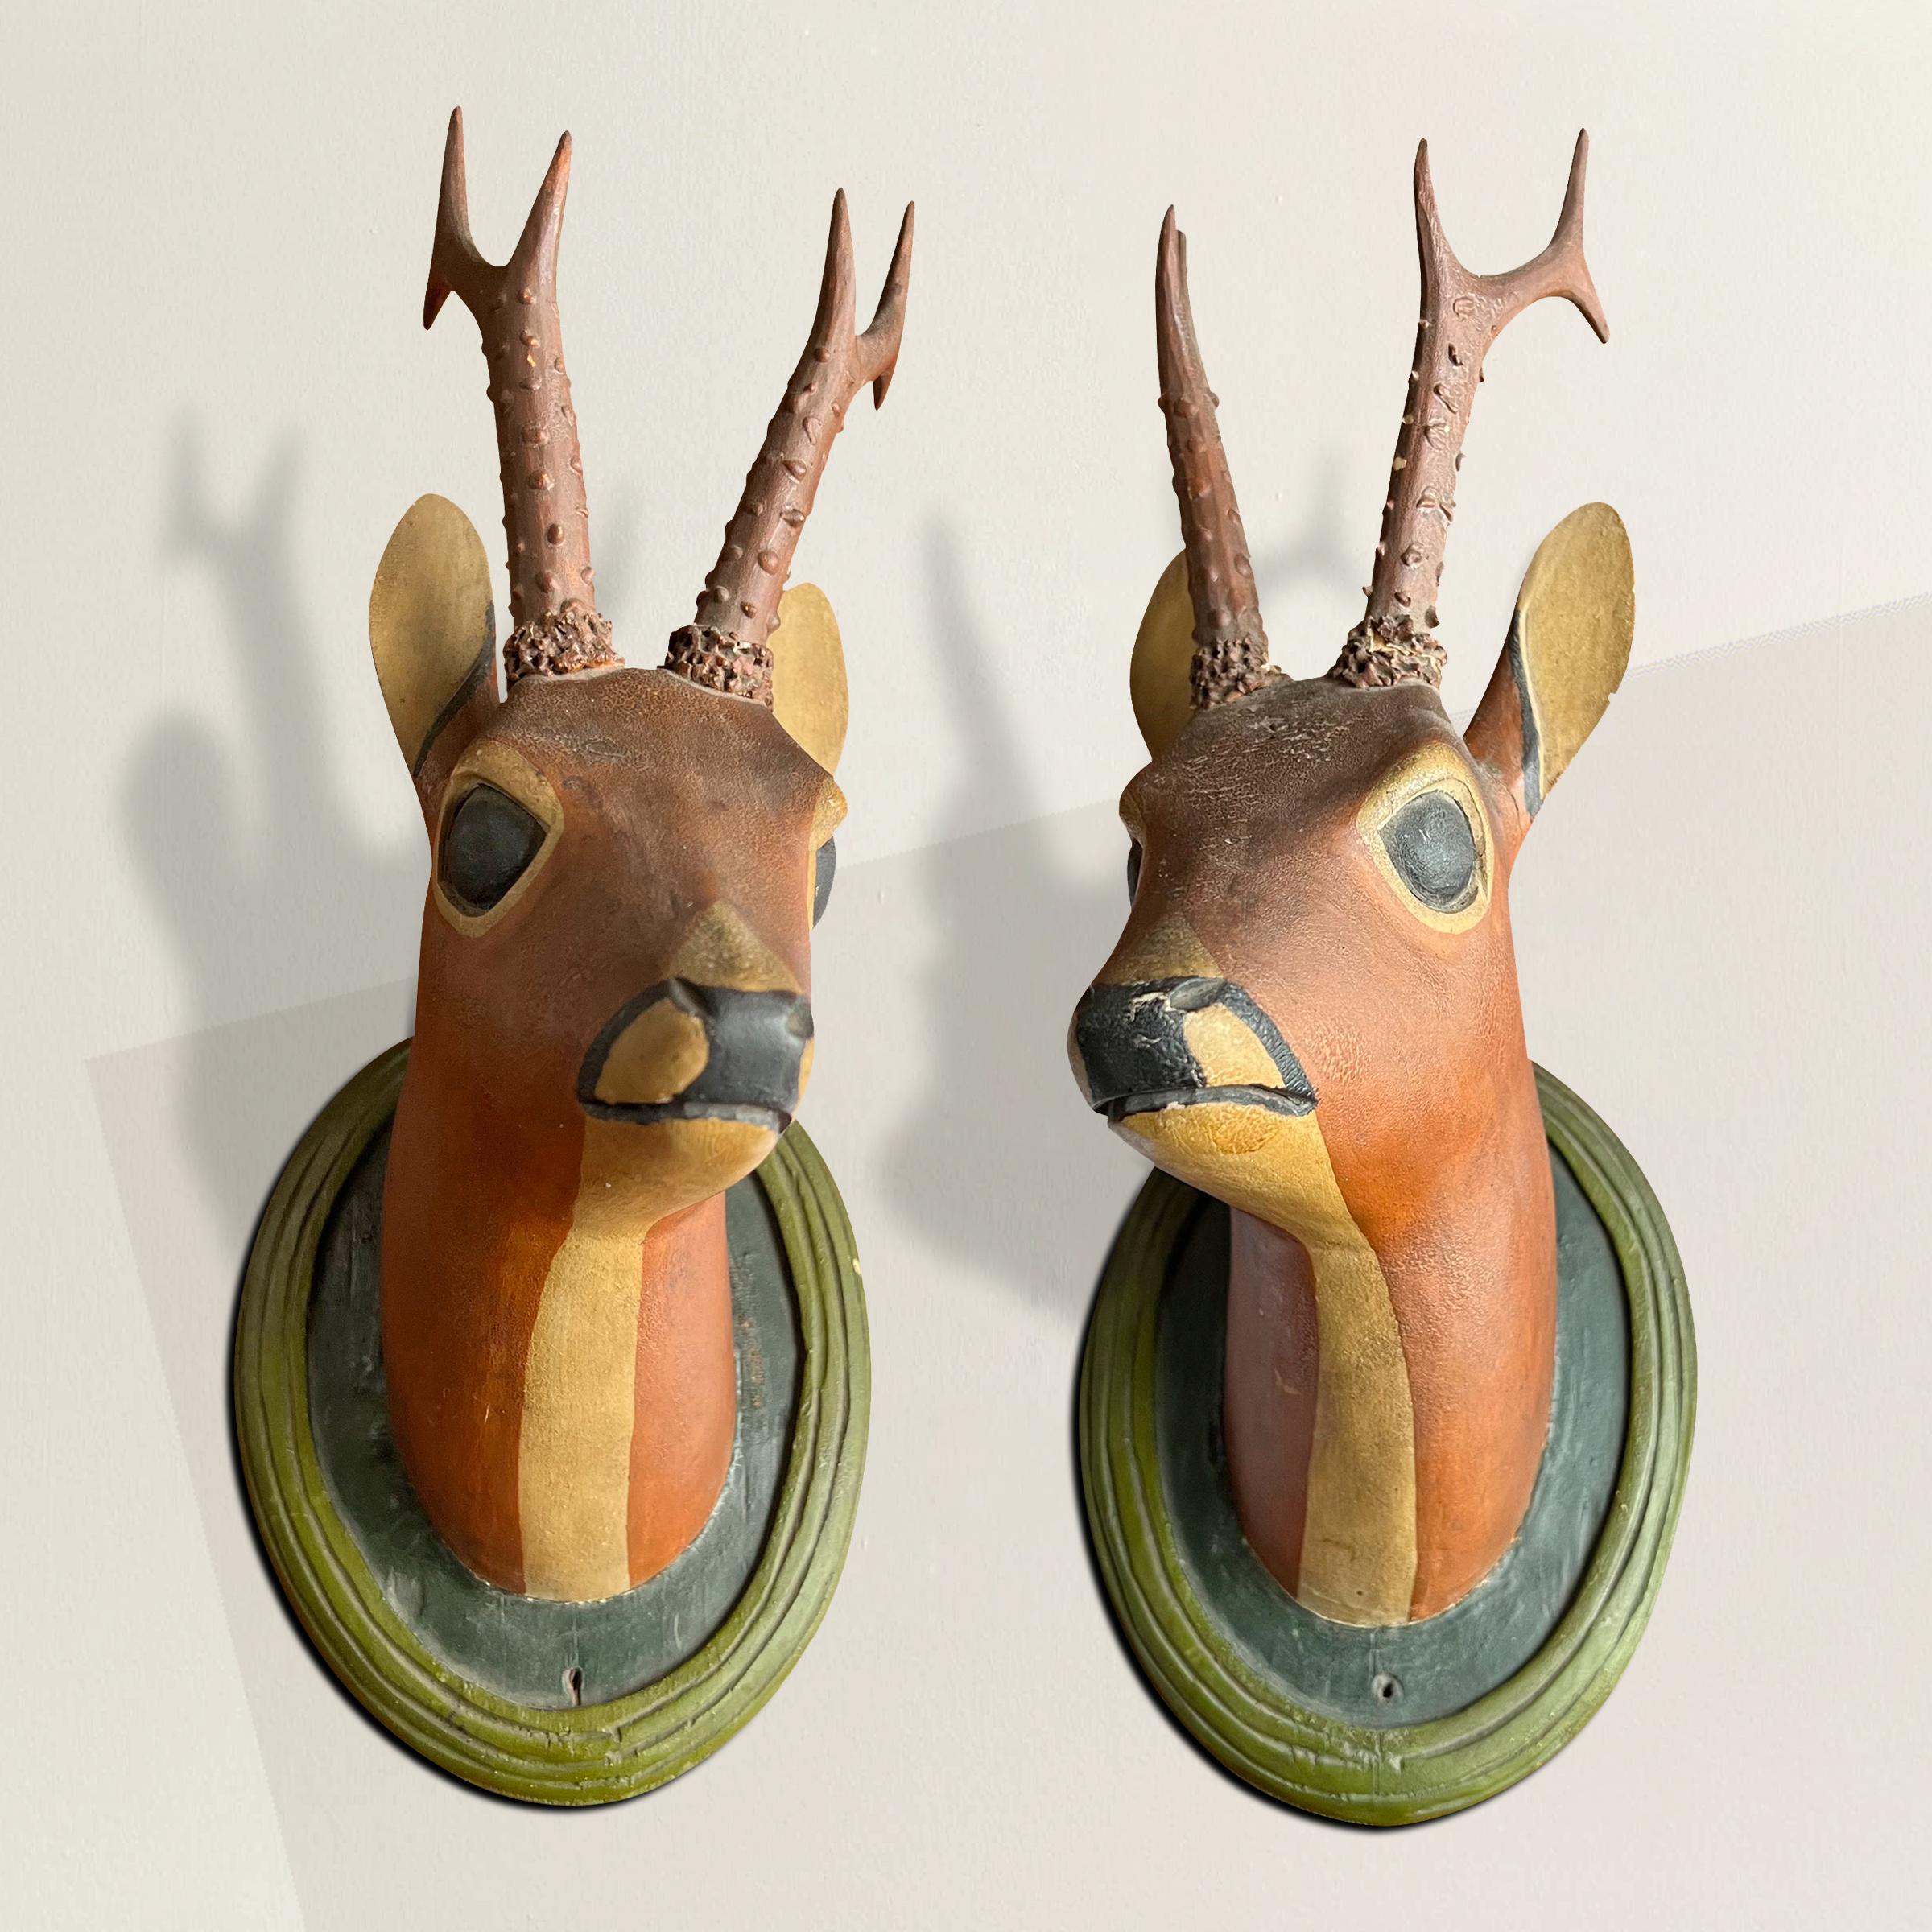 A charming and whimsical pair of 19th century German folk art carved wood roe deer mounts with expressive hand-painted faces and carved and painted wood antlers, mounted on oval wall plaques. The perfect decoration in your kids' room, or for the